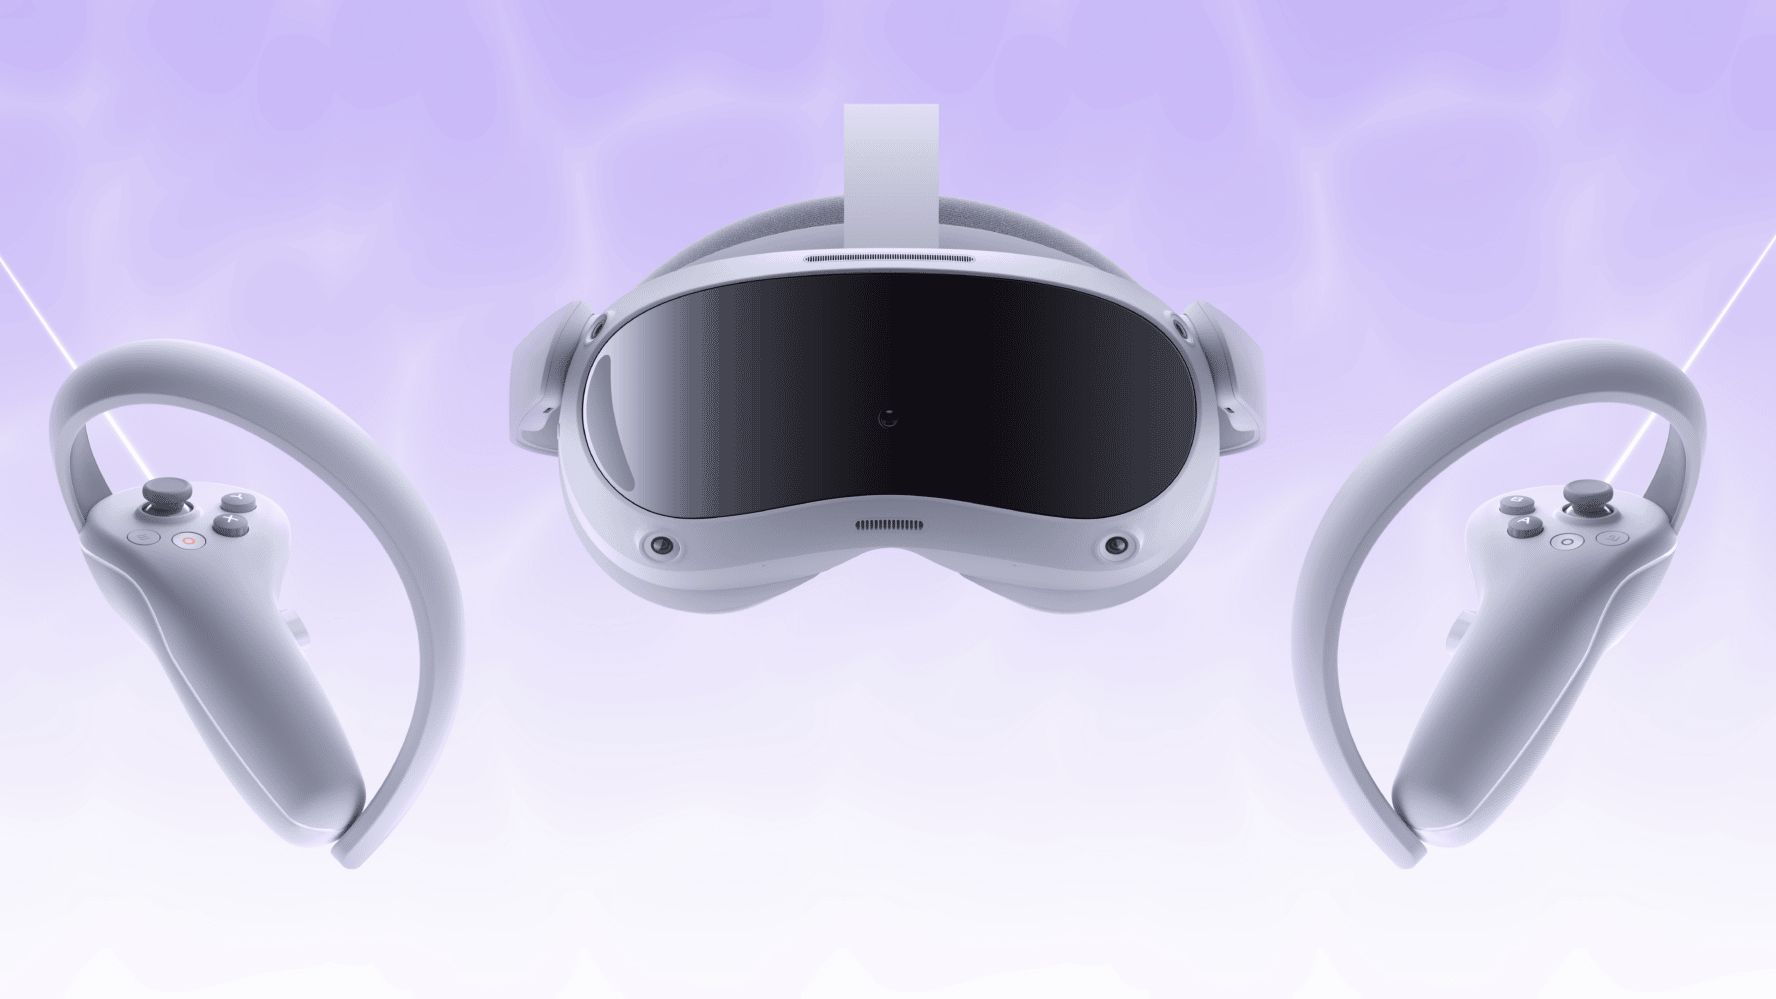 The Pico 4 VR headset and controllers